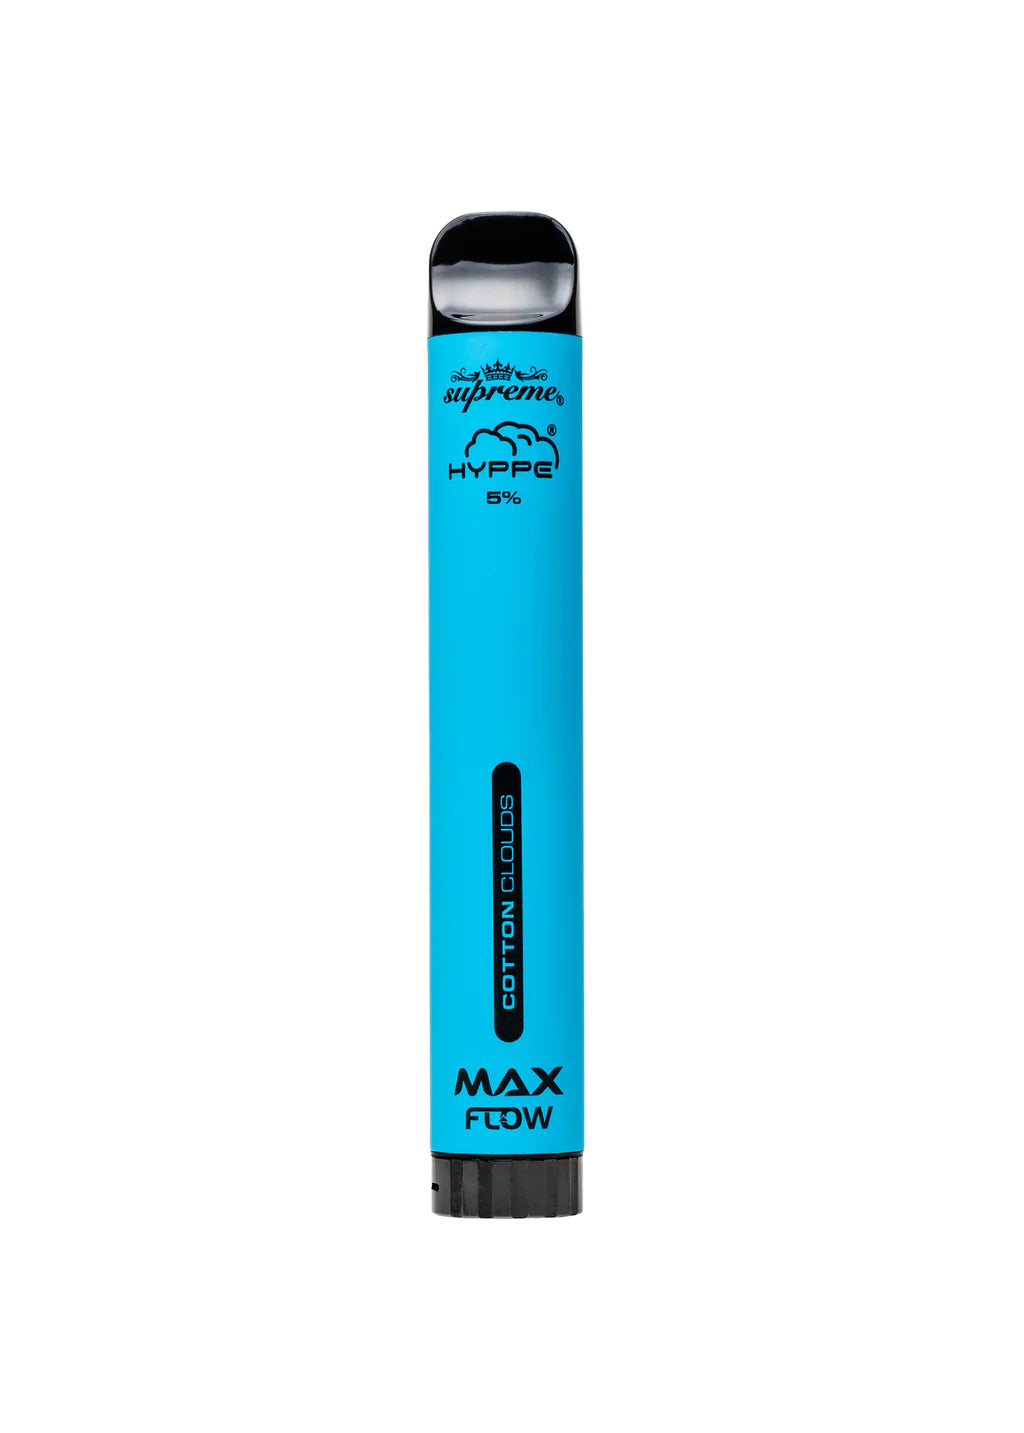 Hyppe Max Flow 2000 Puff